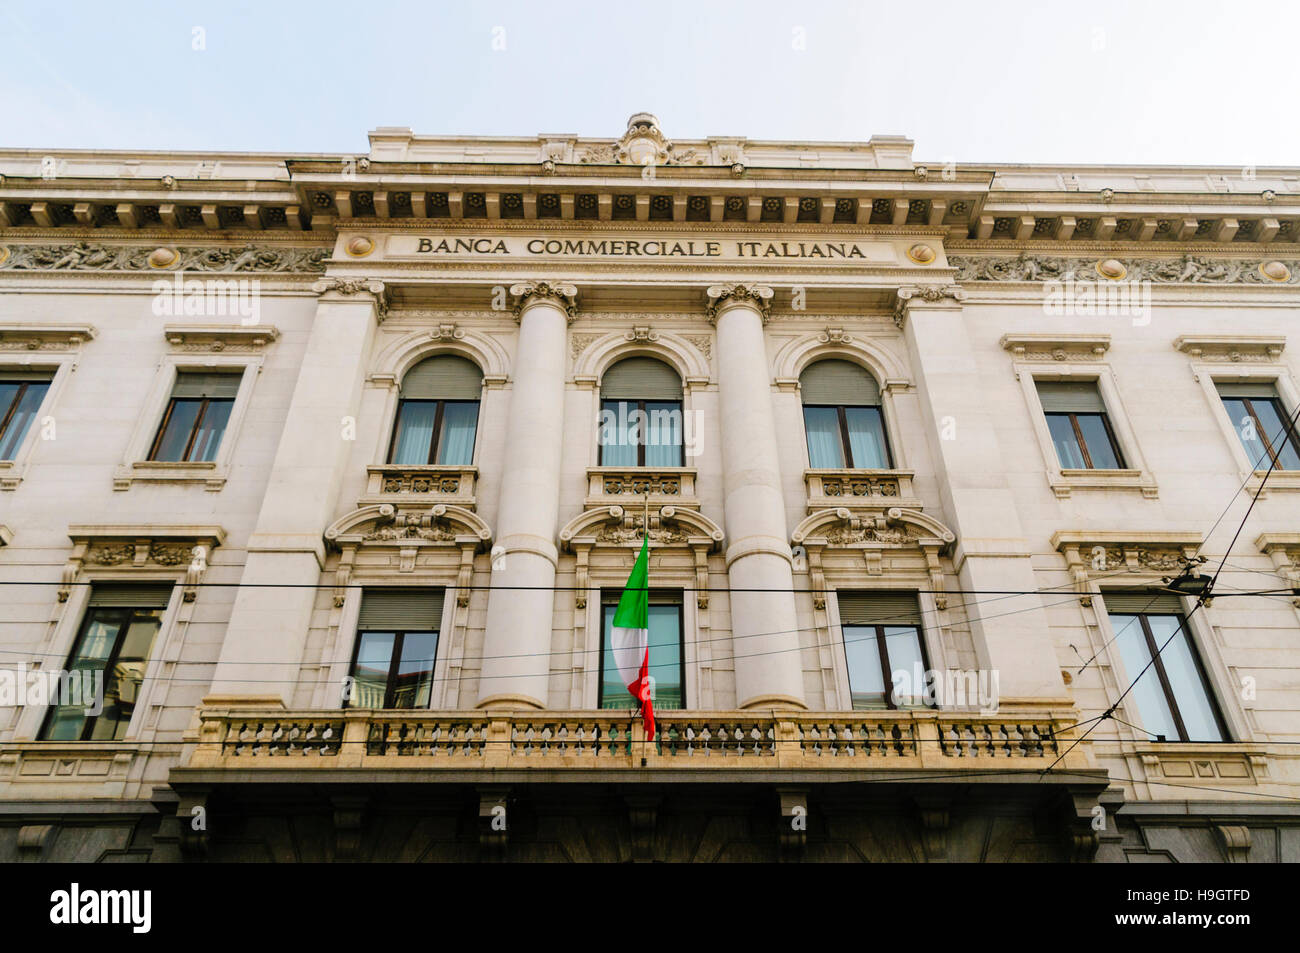 Palace and headquarters of the Banca Commerciale Italia Stock Photo